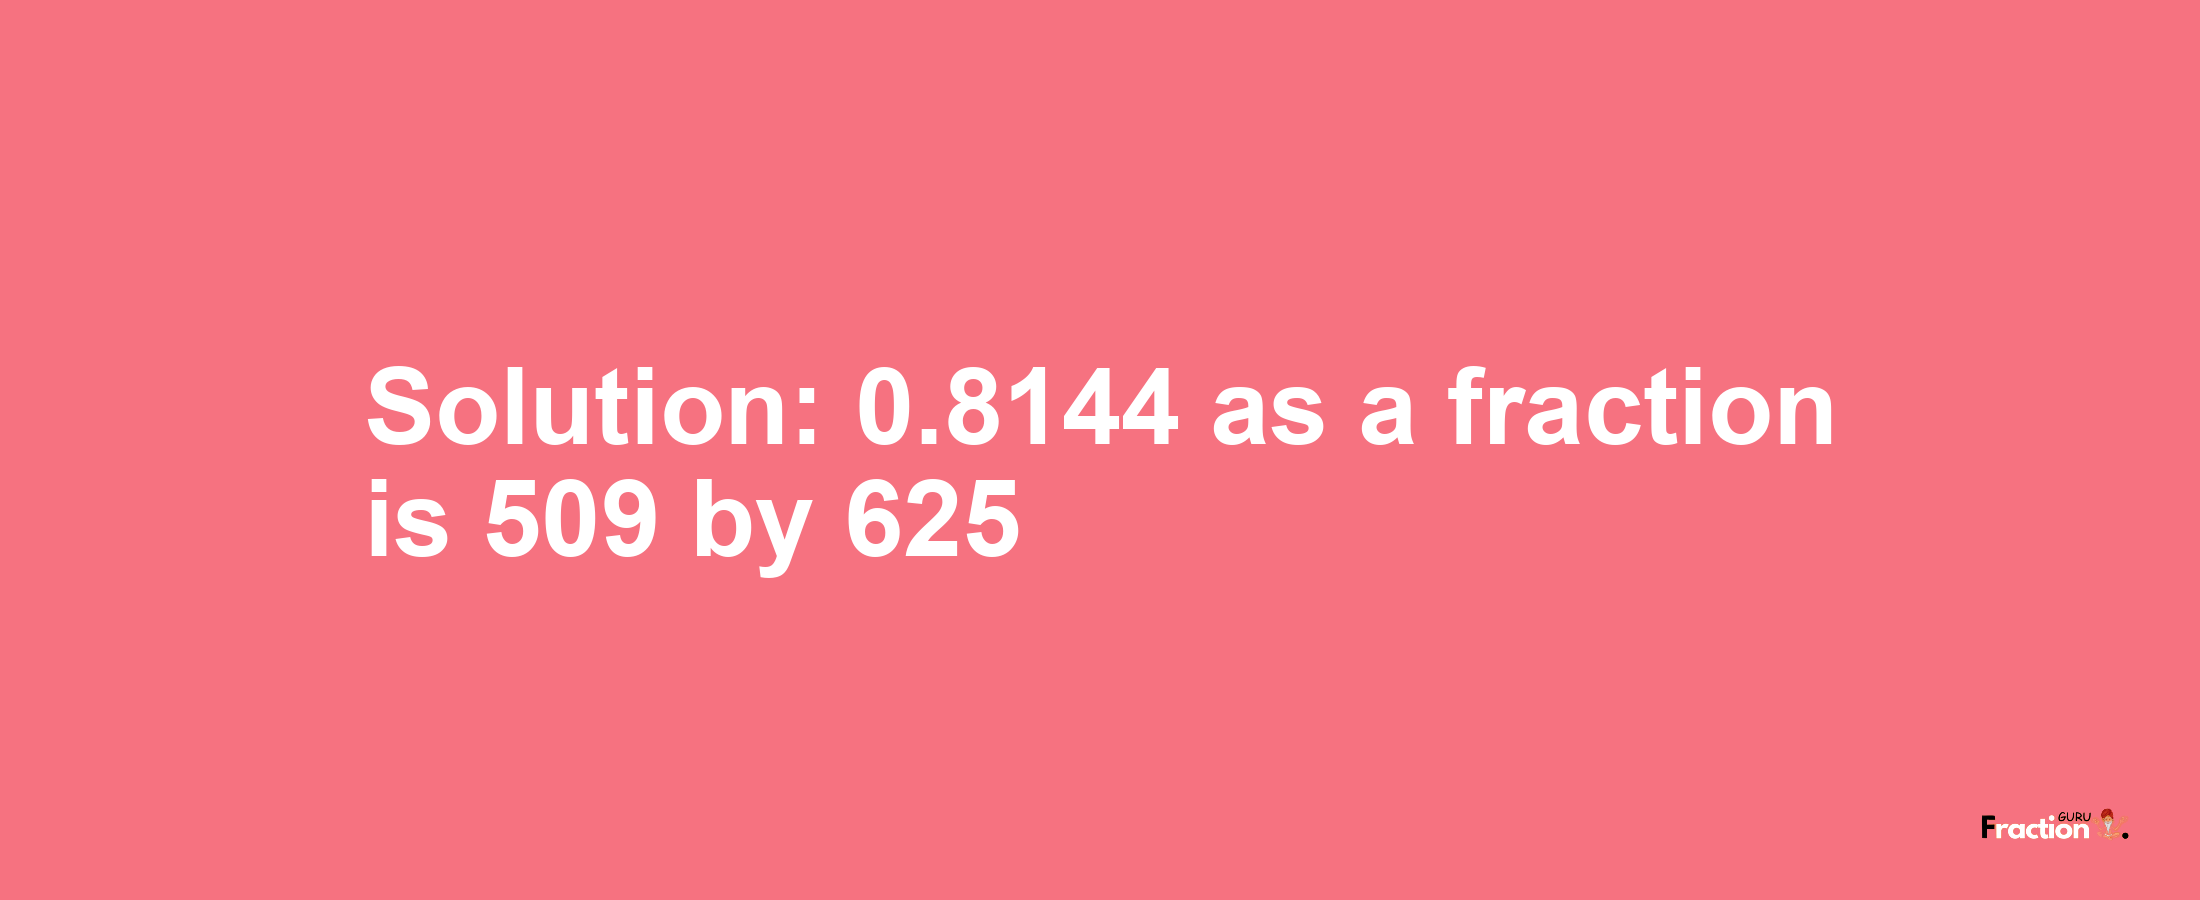 Solution:0.8144 as a fraction is 509/625